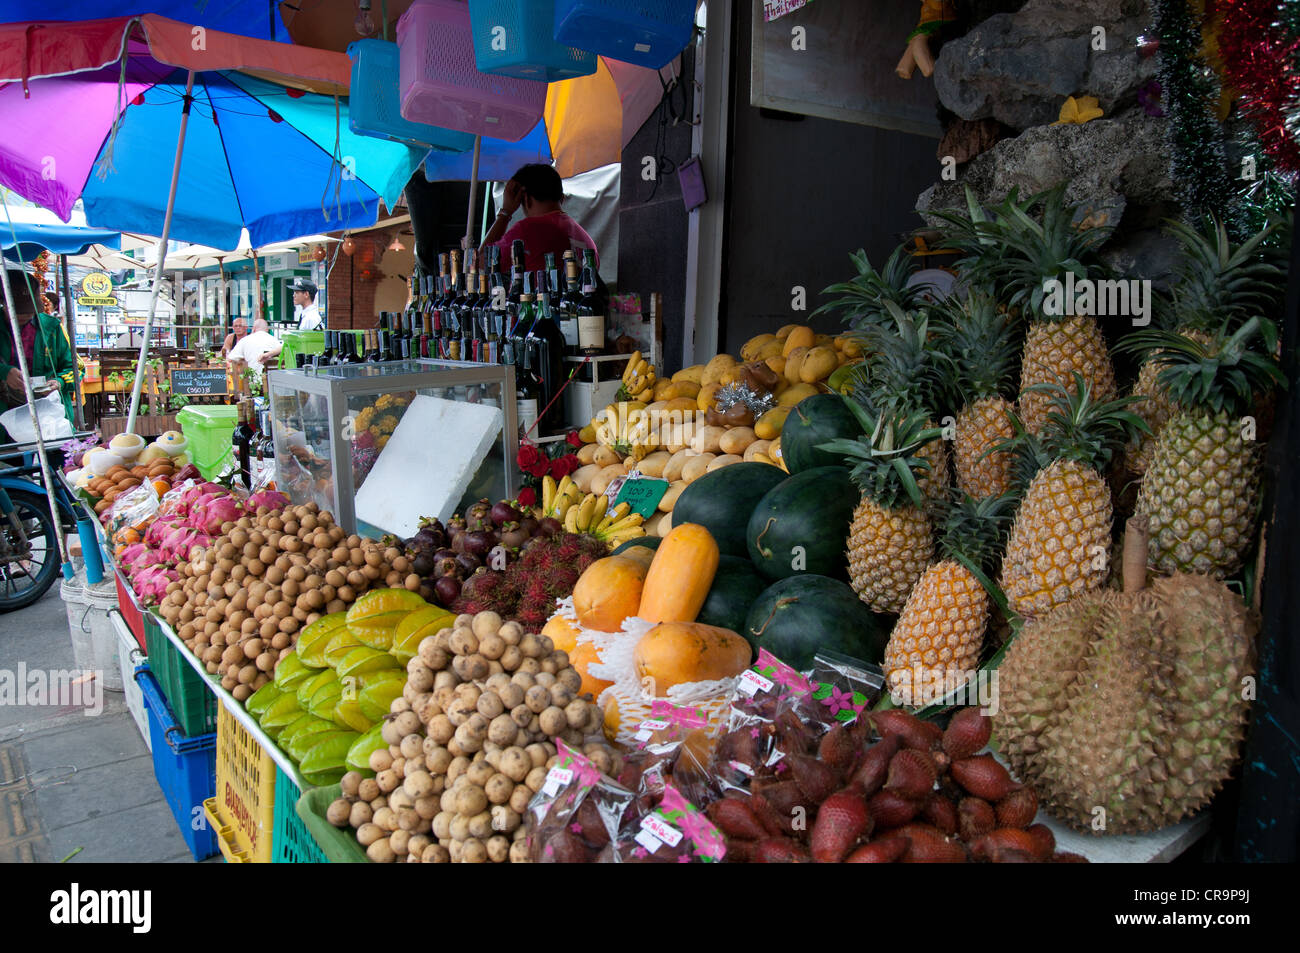 Durian, mango, pineapple, rambutan and other fruits sold on street in Phuket, Thailand Stock Photo